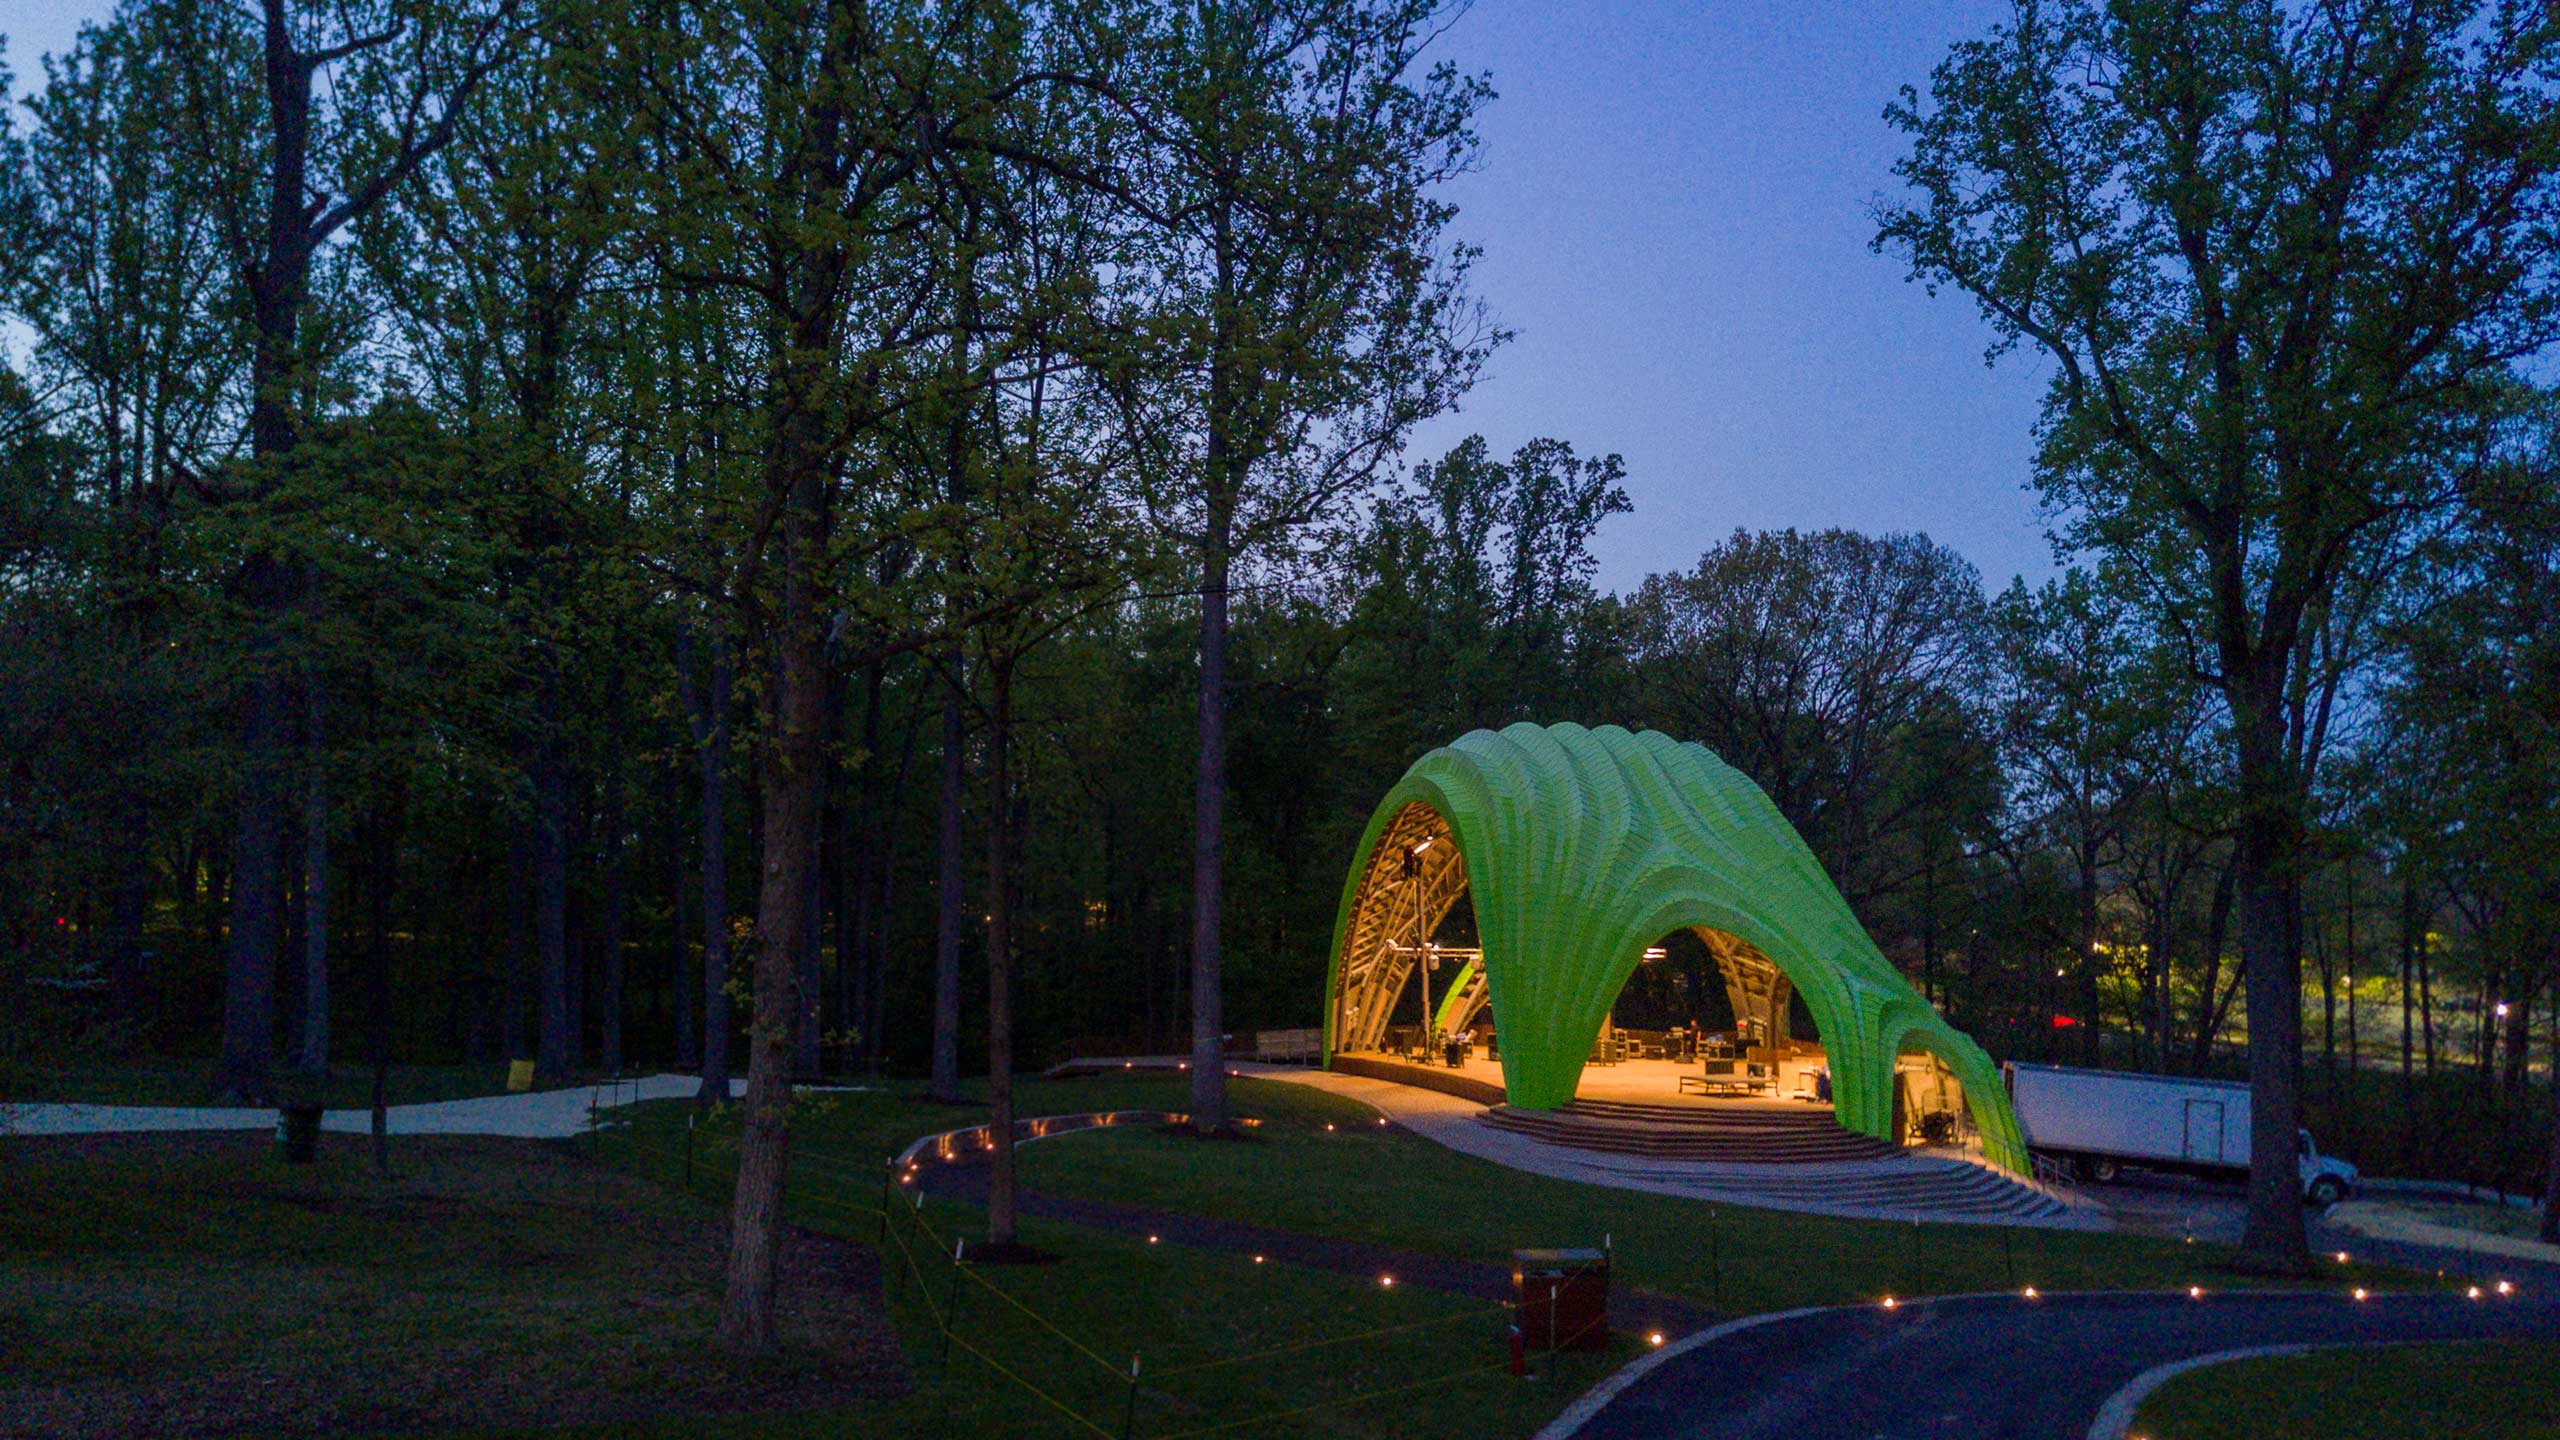 The Chrysalis at Merriweather Park in Symphony Woods.